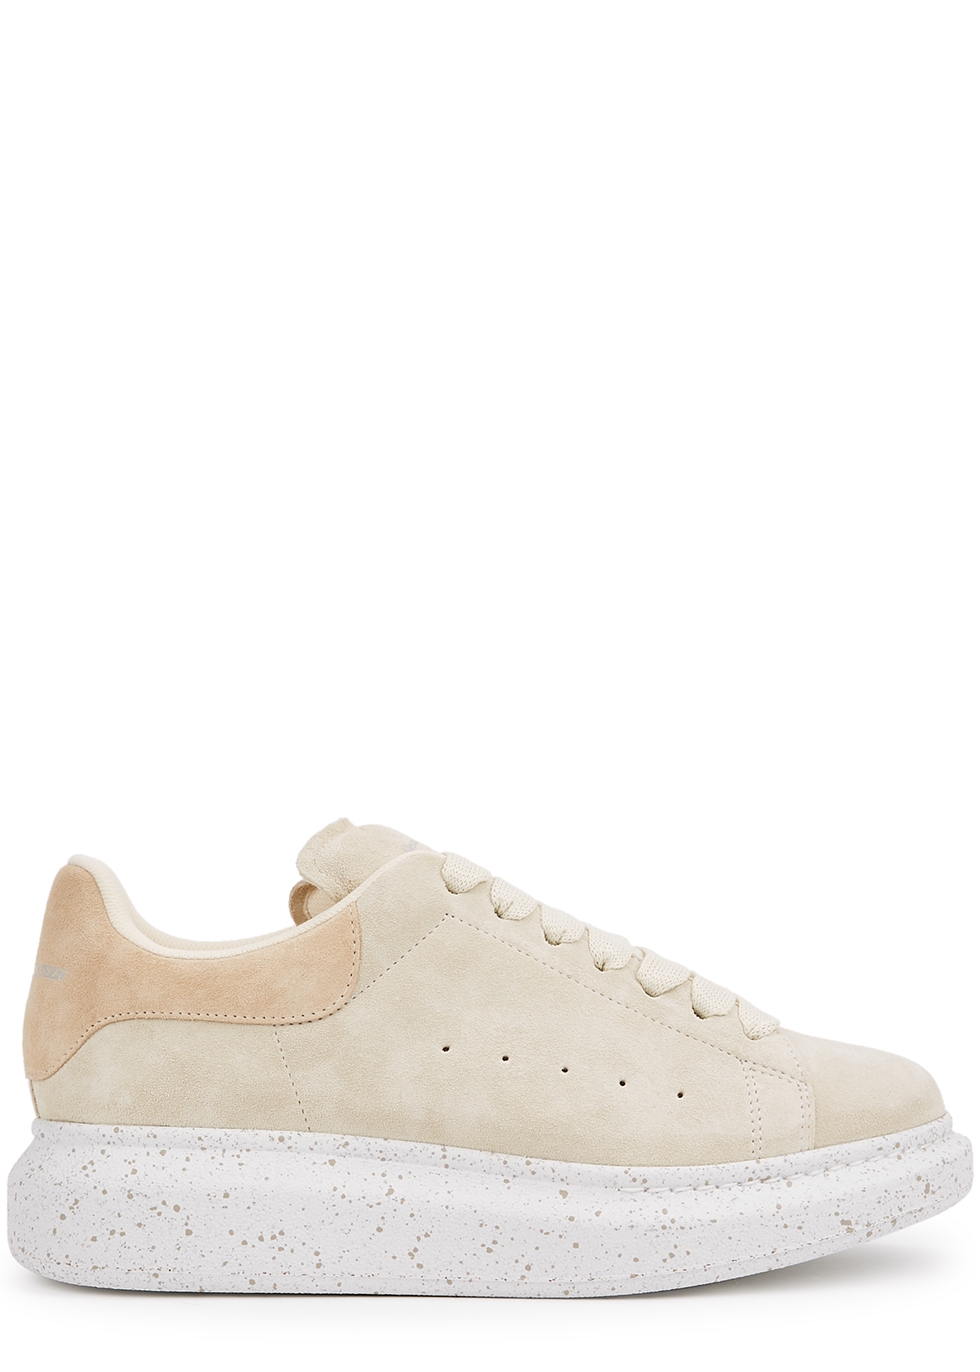 Oversized stone suede sneakers